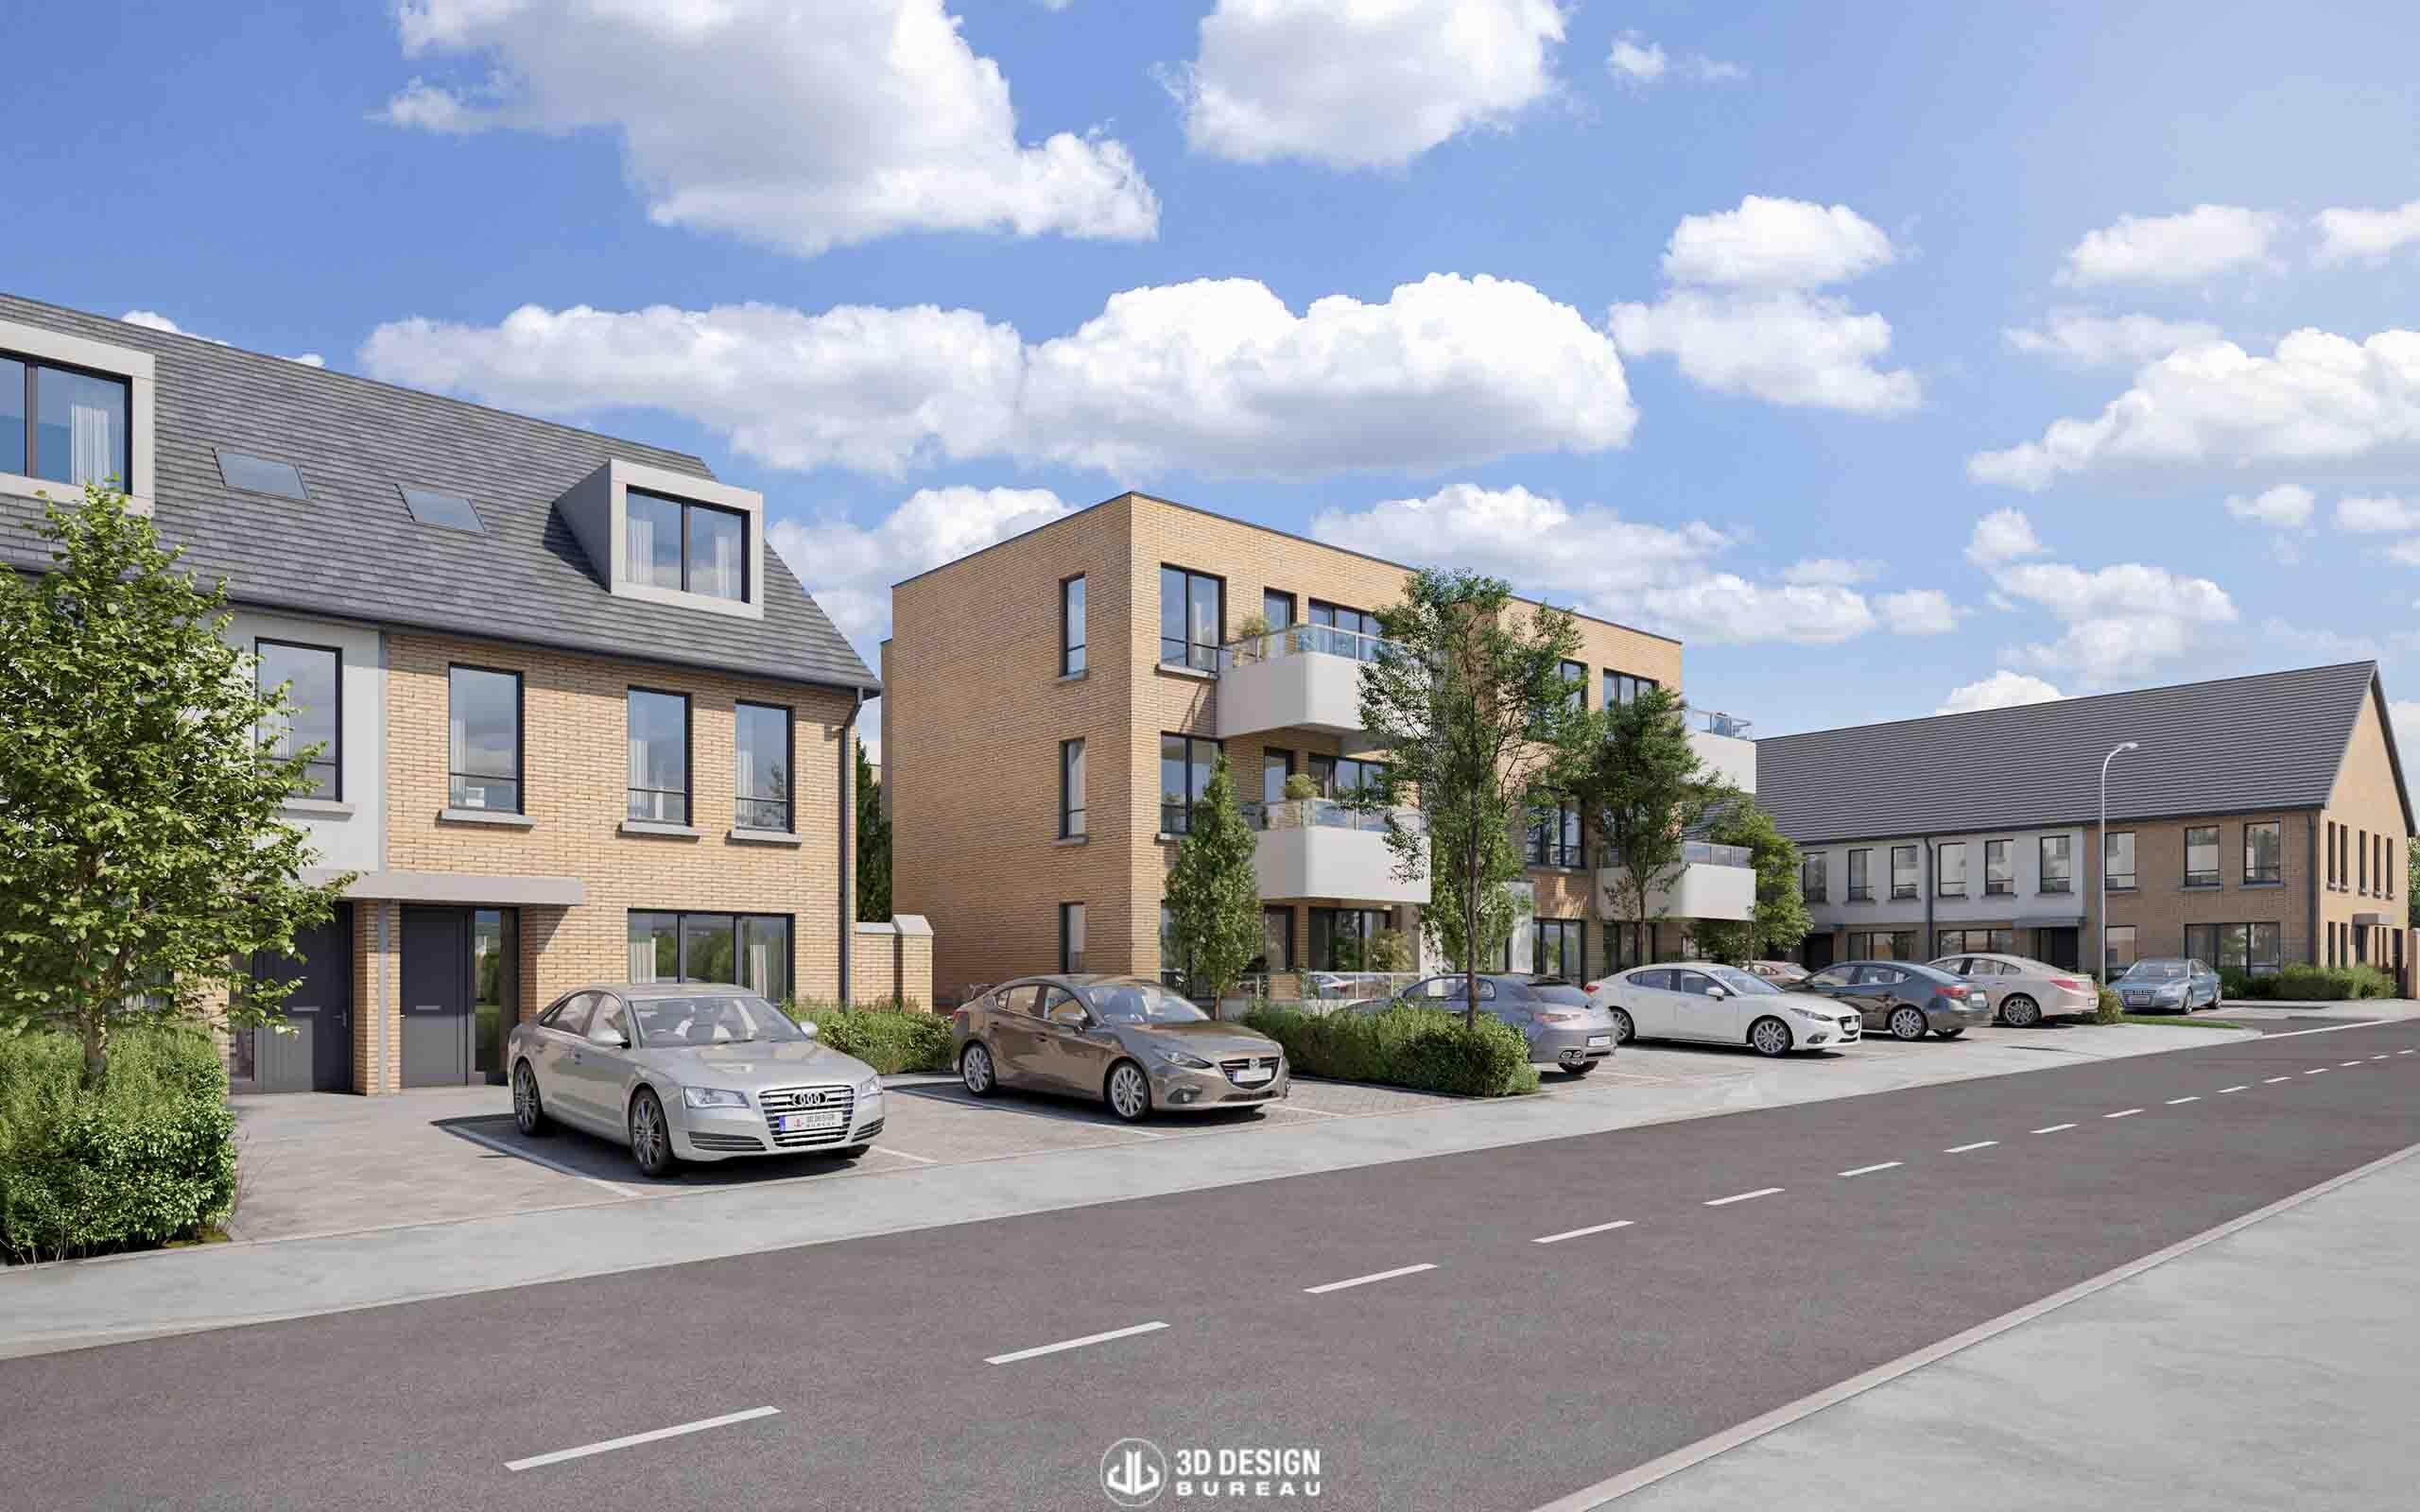 Computer generated imagery of the proposed development in Navan